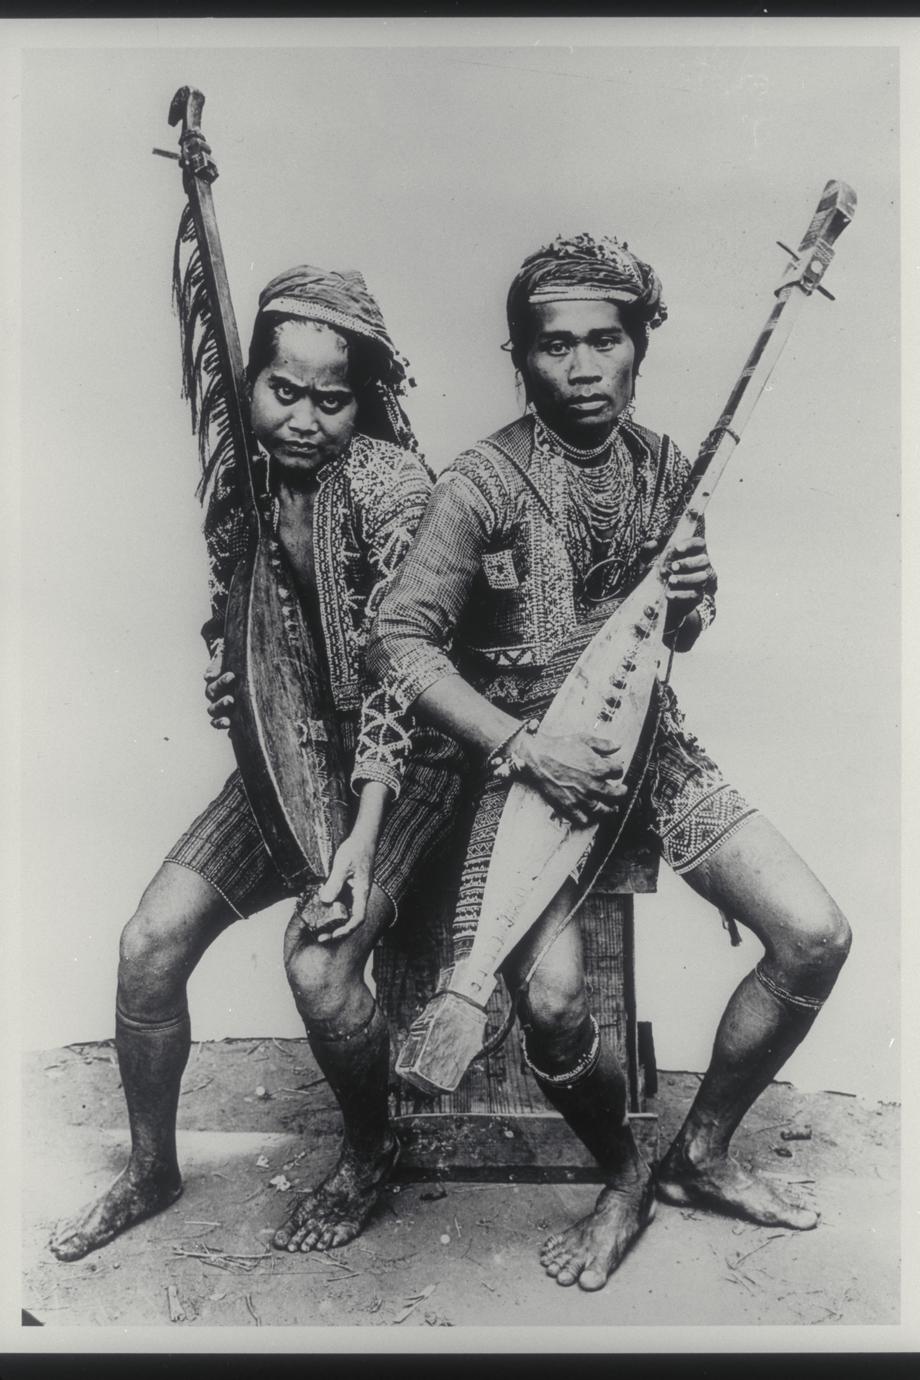 Two musicians in traditional clothing, ca. 1920-1930